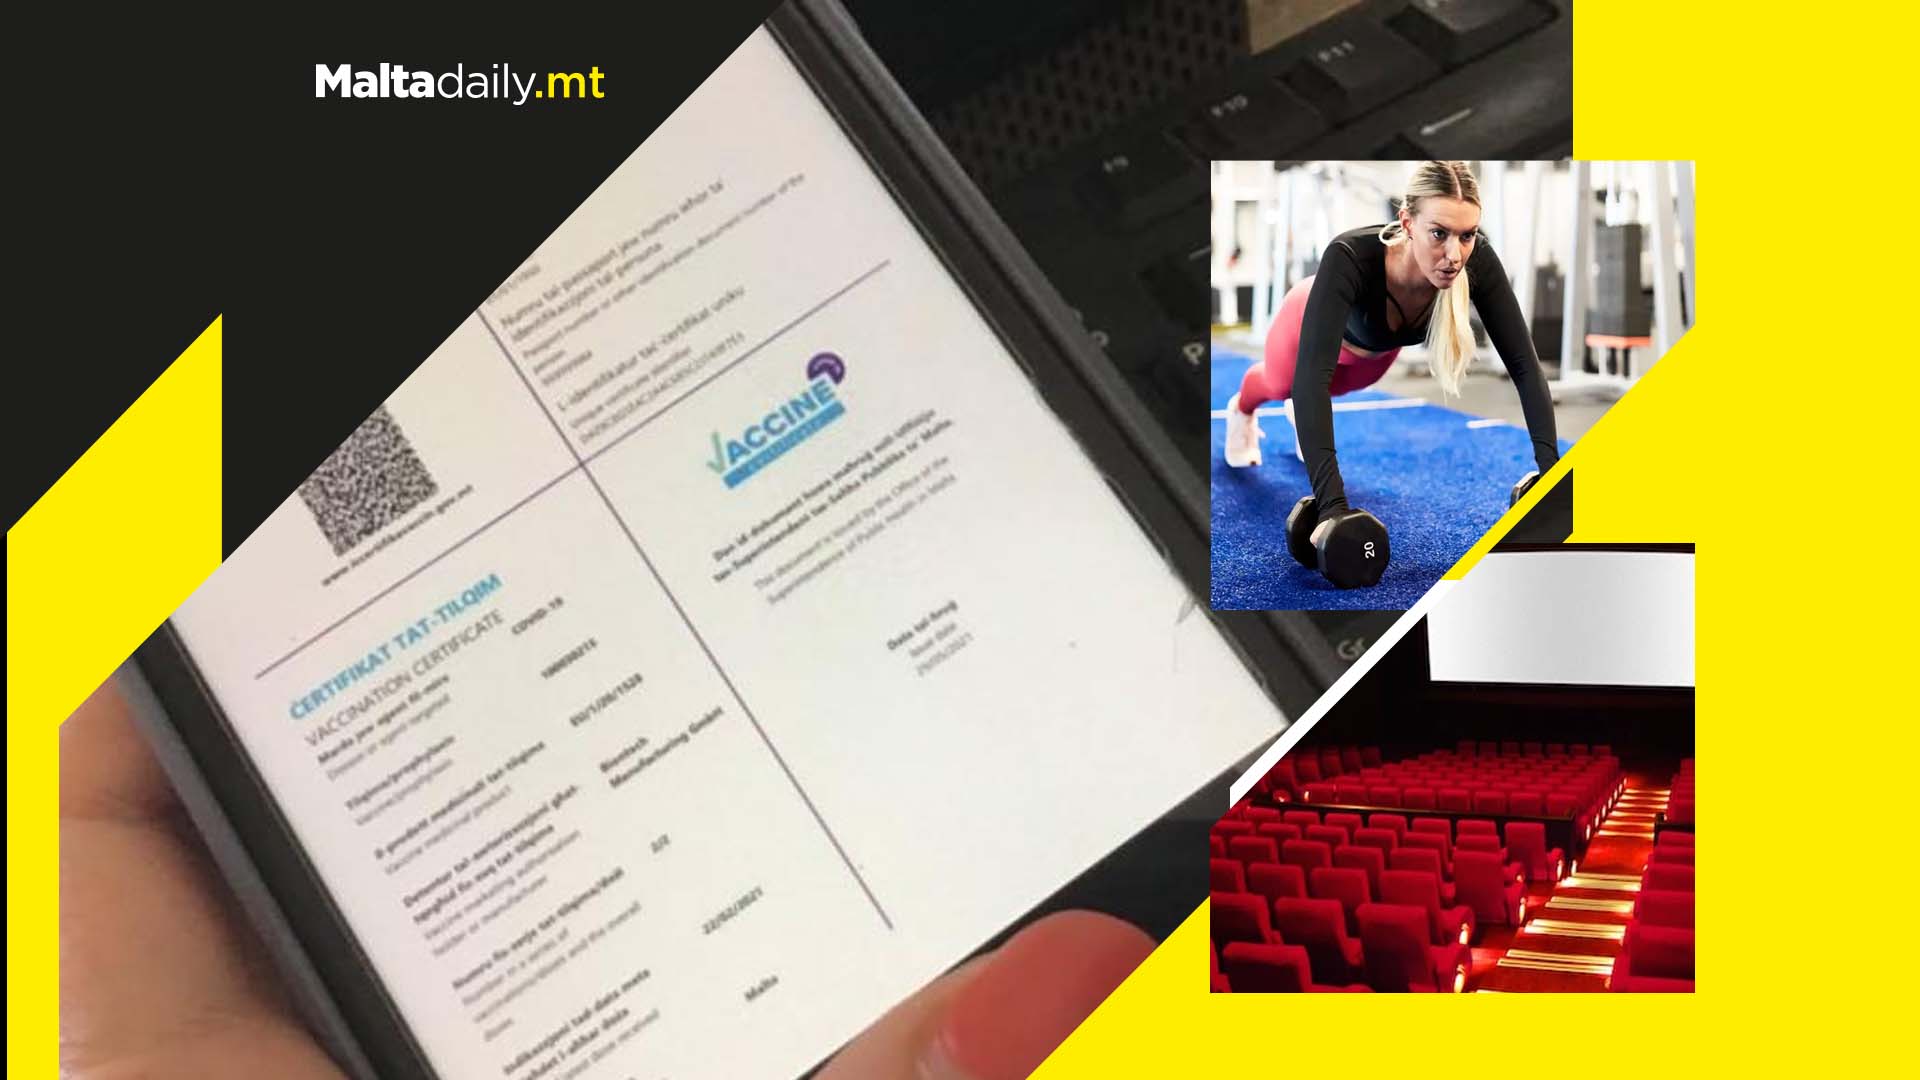 Jab certificates for cinemas, gyms and bars no longer needed